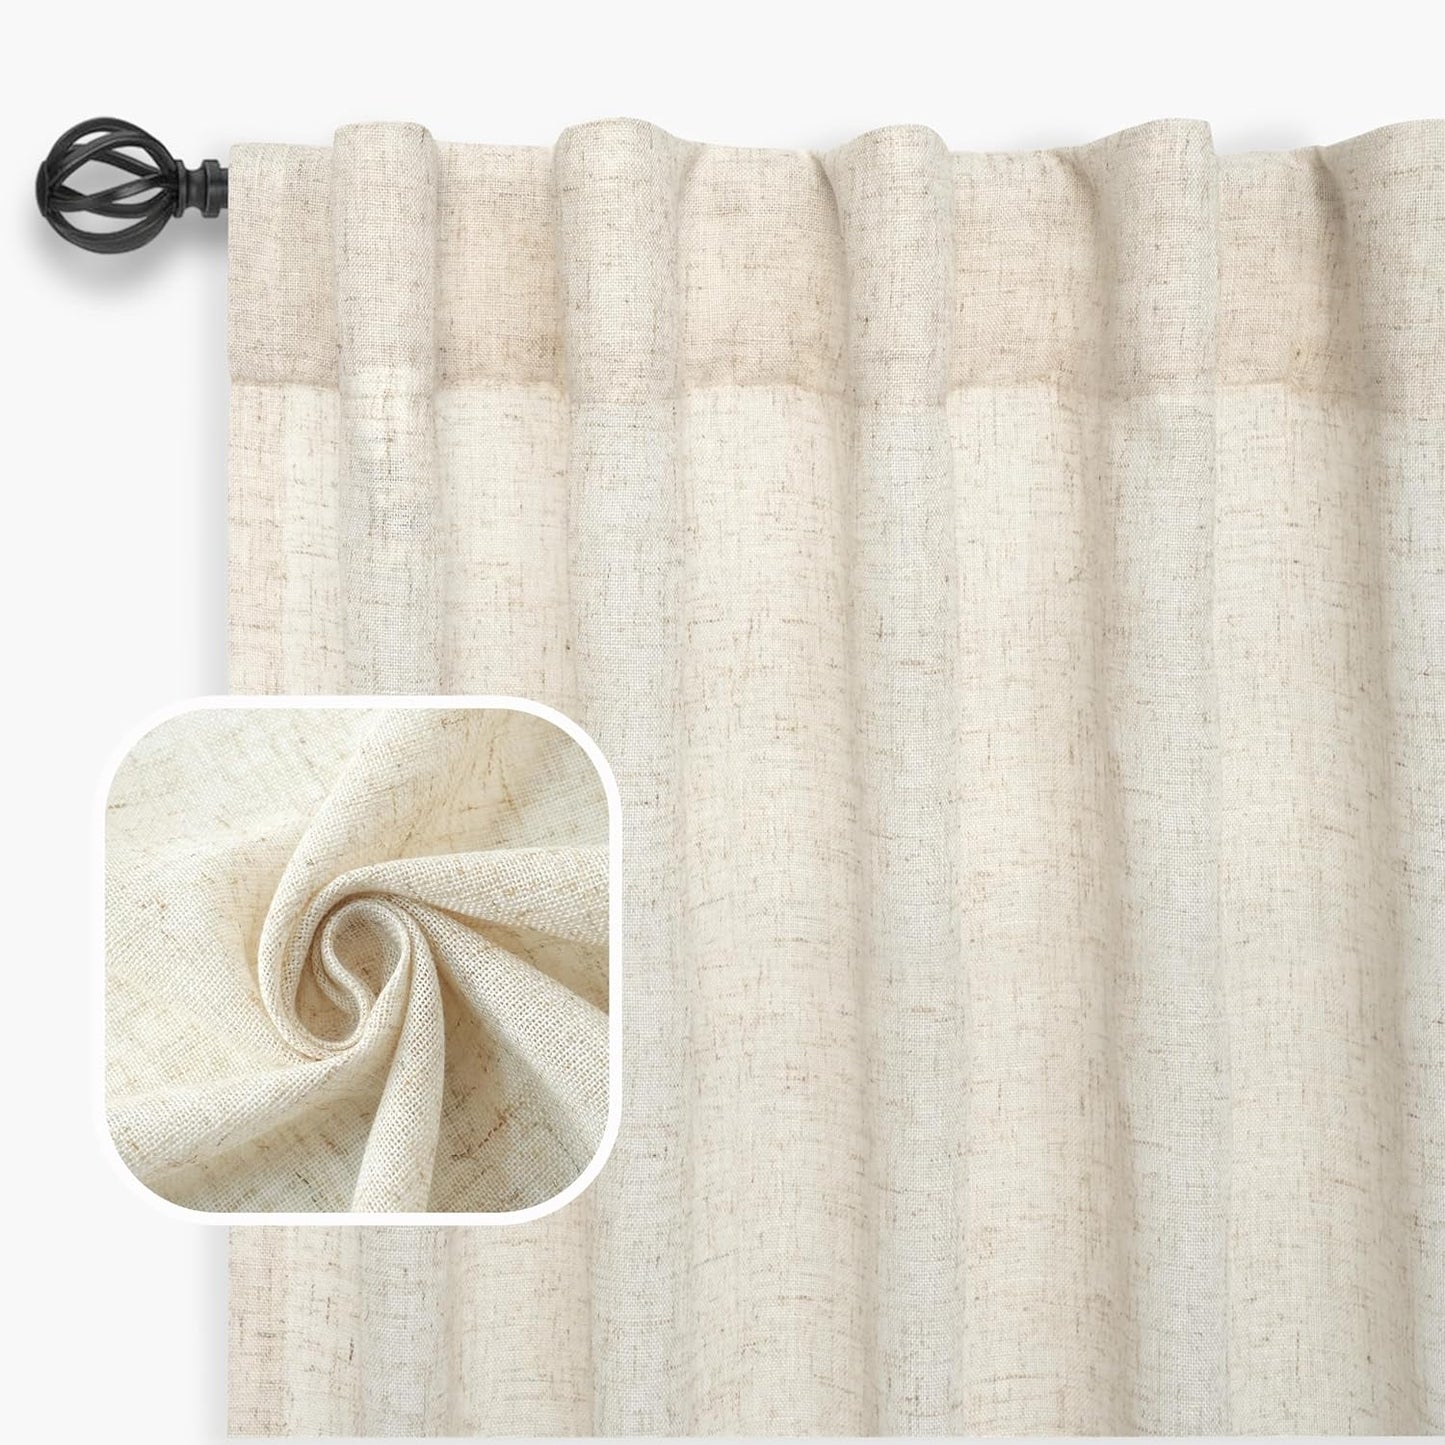 Driftaway 100% Blackout Natural Linen Curtains for Bedroom 96 Inches Long Double Layer Drape Farmhouse Thermal Insulated 3 Inch Rod Pocket Back Tab Full Light Blocking 2 Panels for Living Room Nursery  DriftAway   